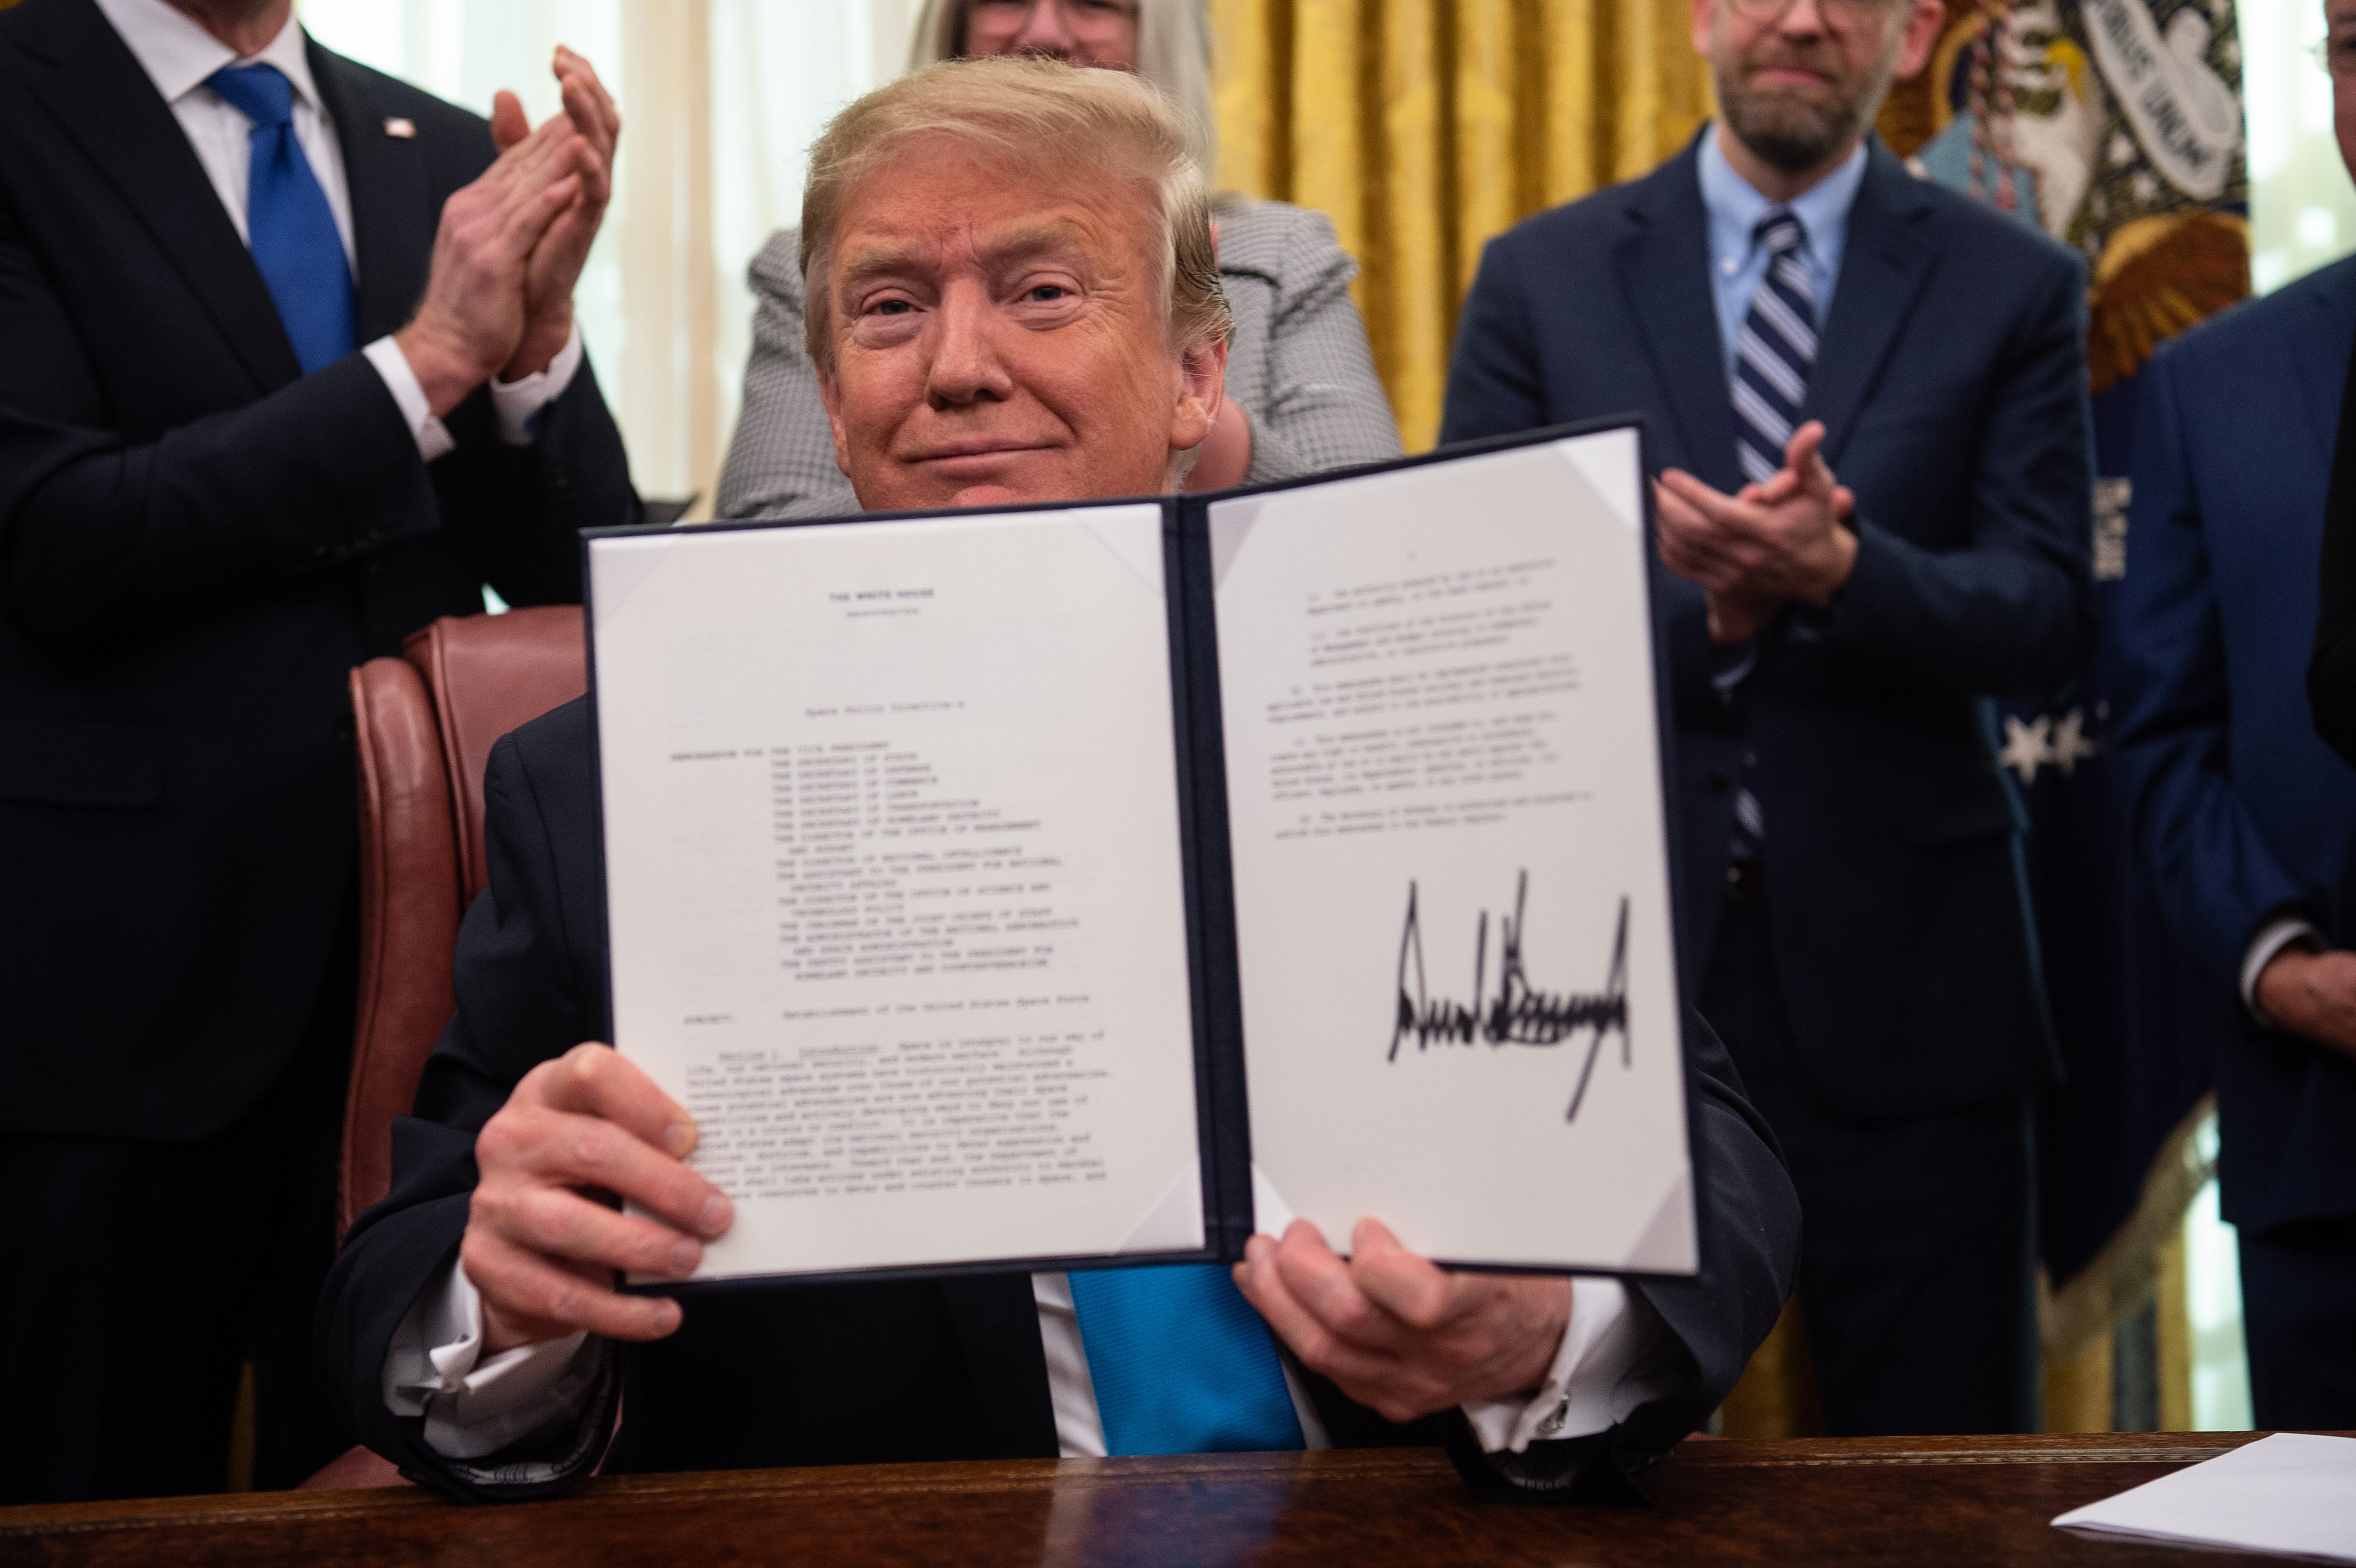 US President Donald Trump shows his signature on the Space Policy Directive-4 (SPD-4) on February 19, 2019, at the White House in Washington, DC. (NICHOLAS KAMM/AFP/Getty Images)